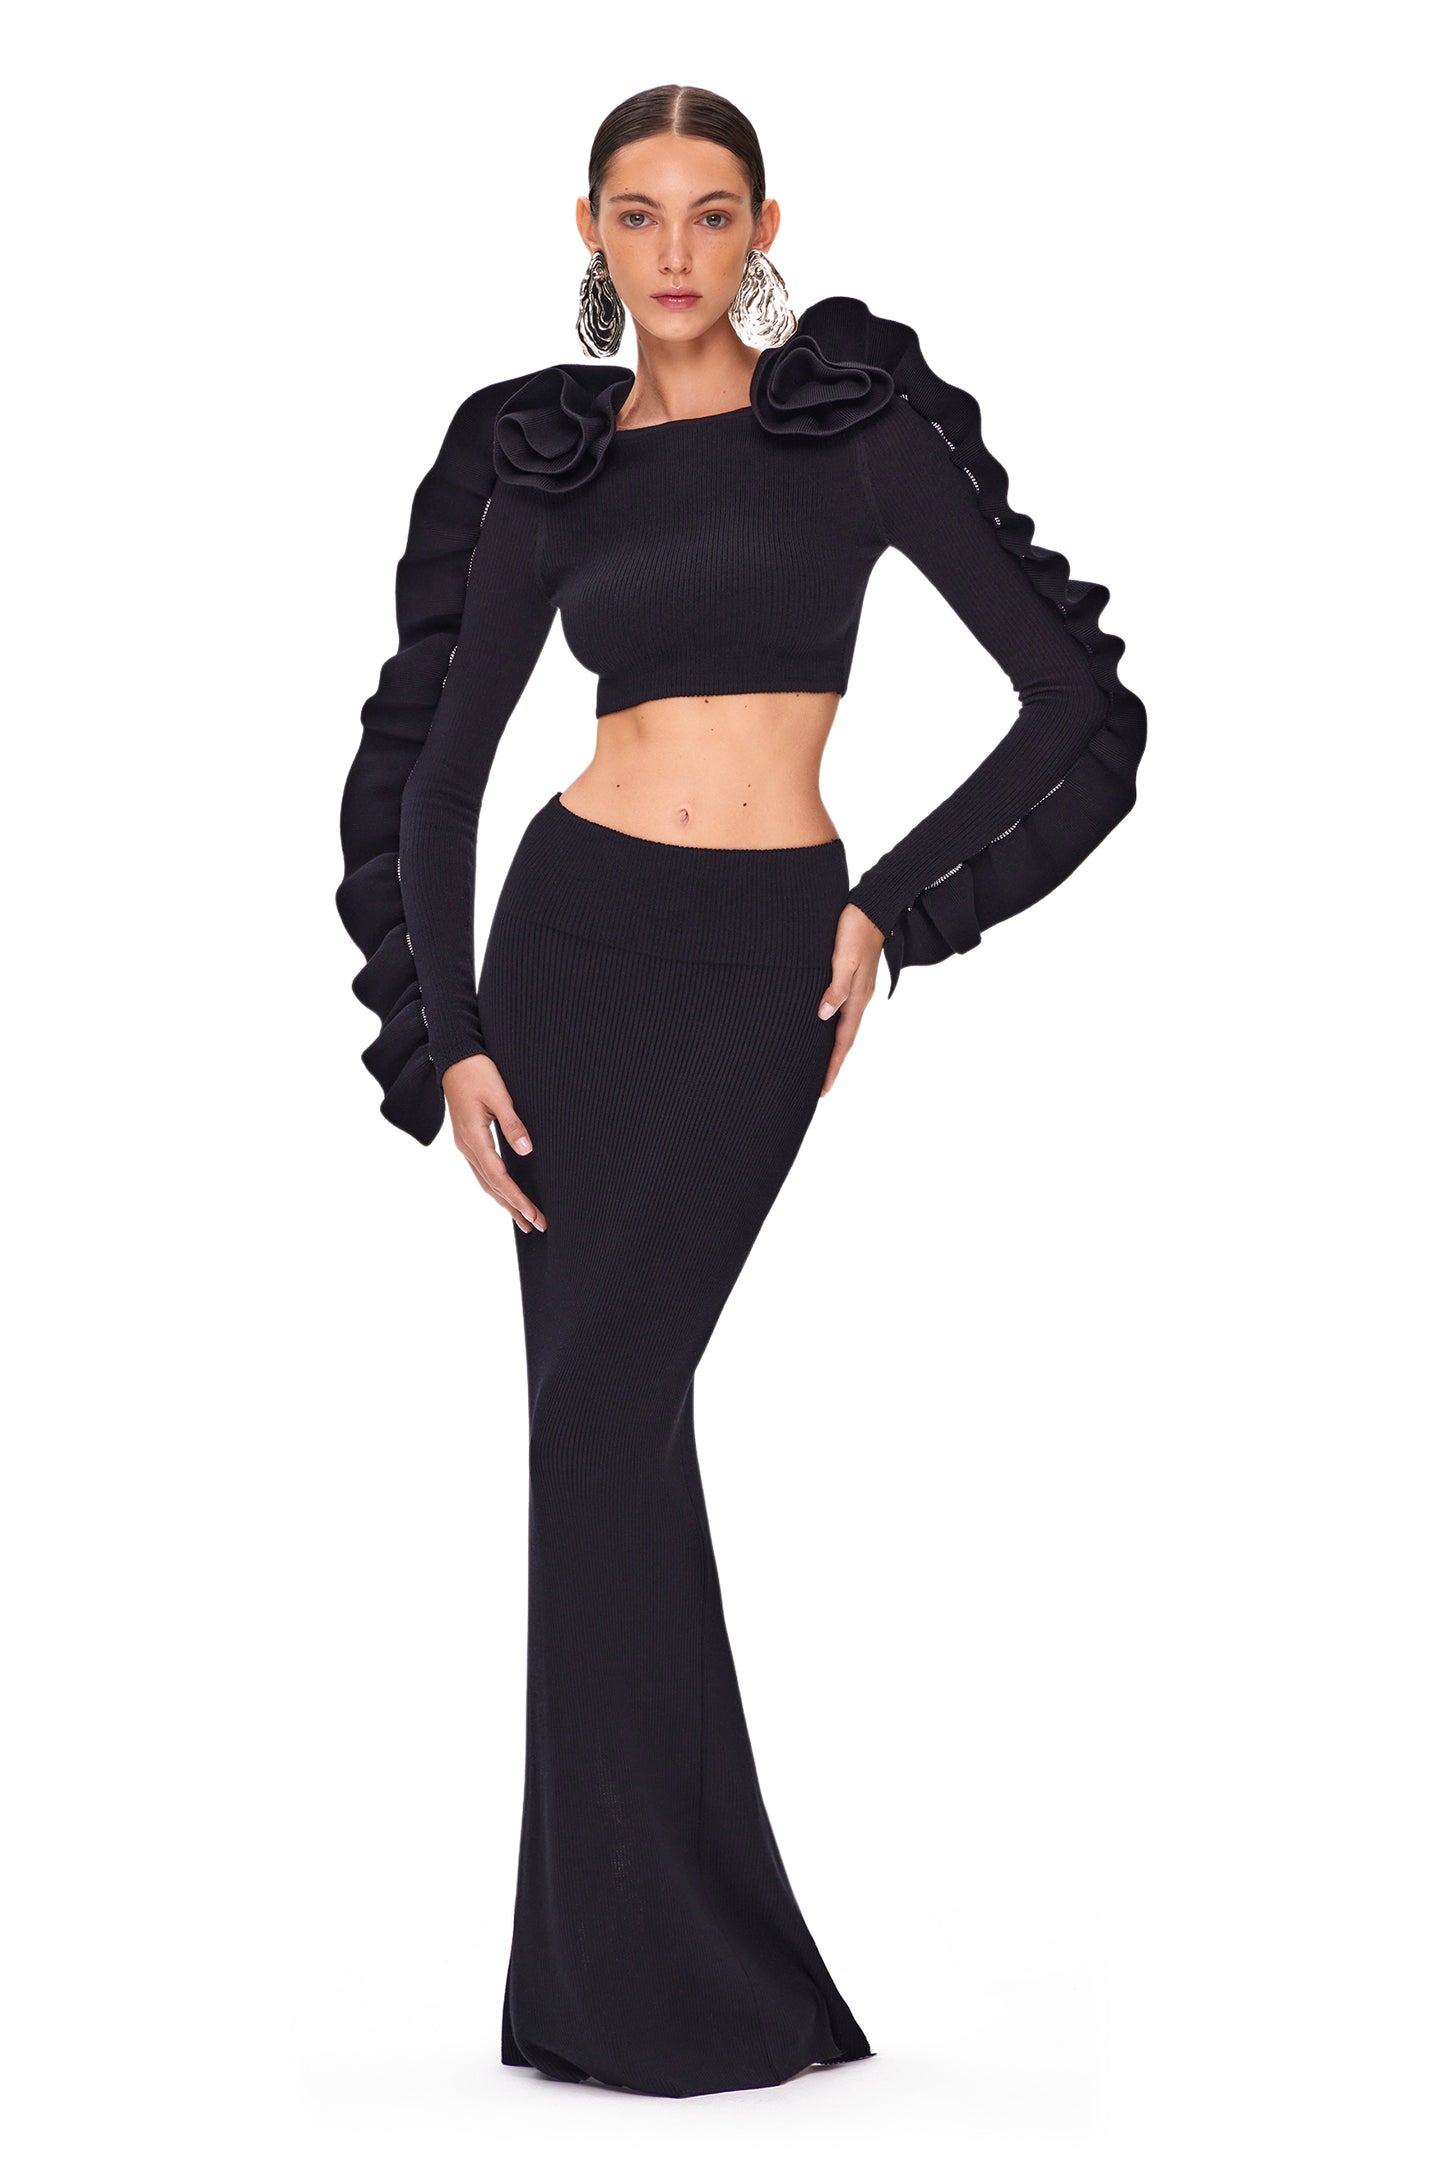 KNITTED SUIT COUTURE LONG SLEEVES RUCHES TOP AND LONG SKIRT WITH BACK SPLIT